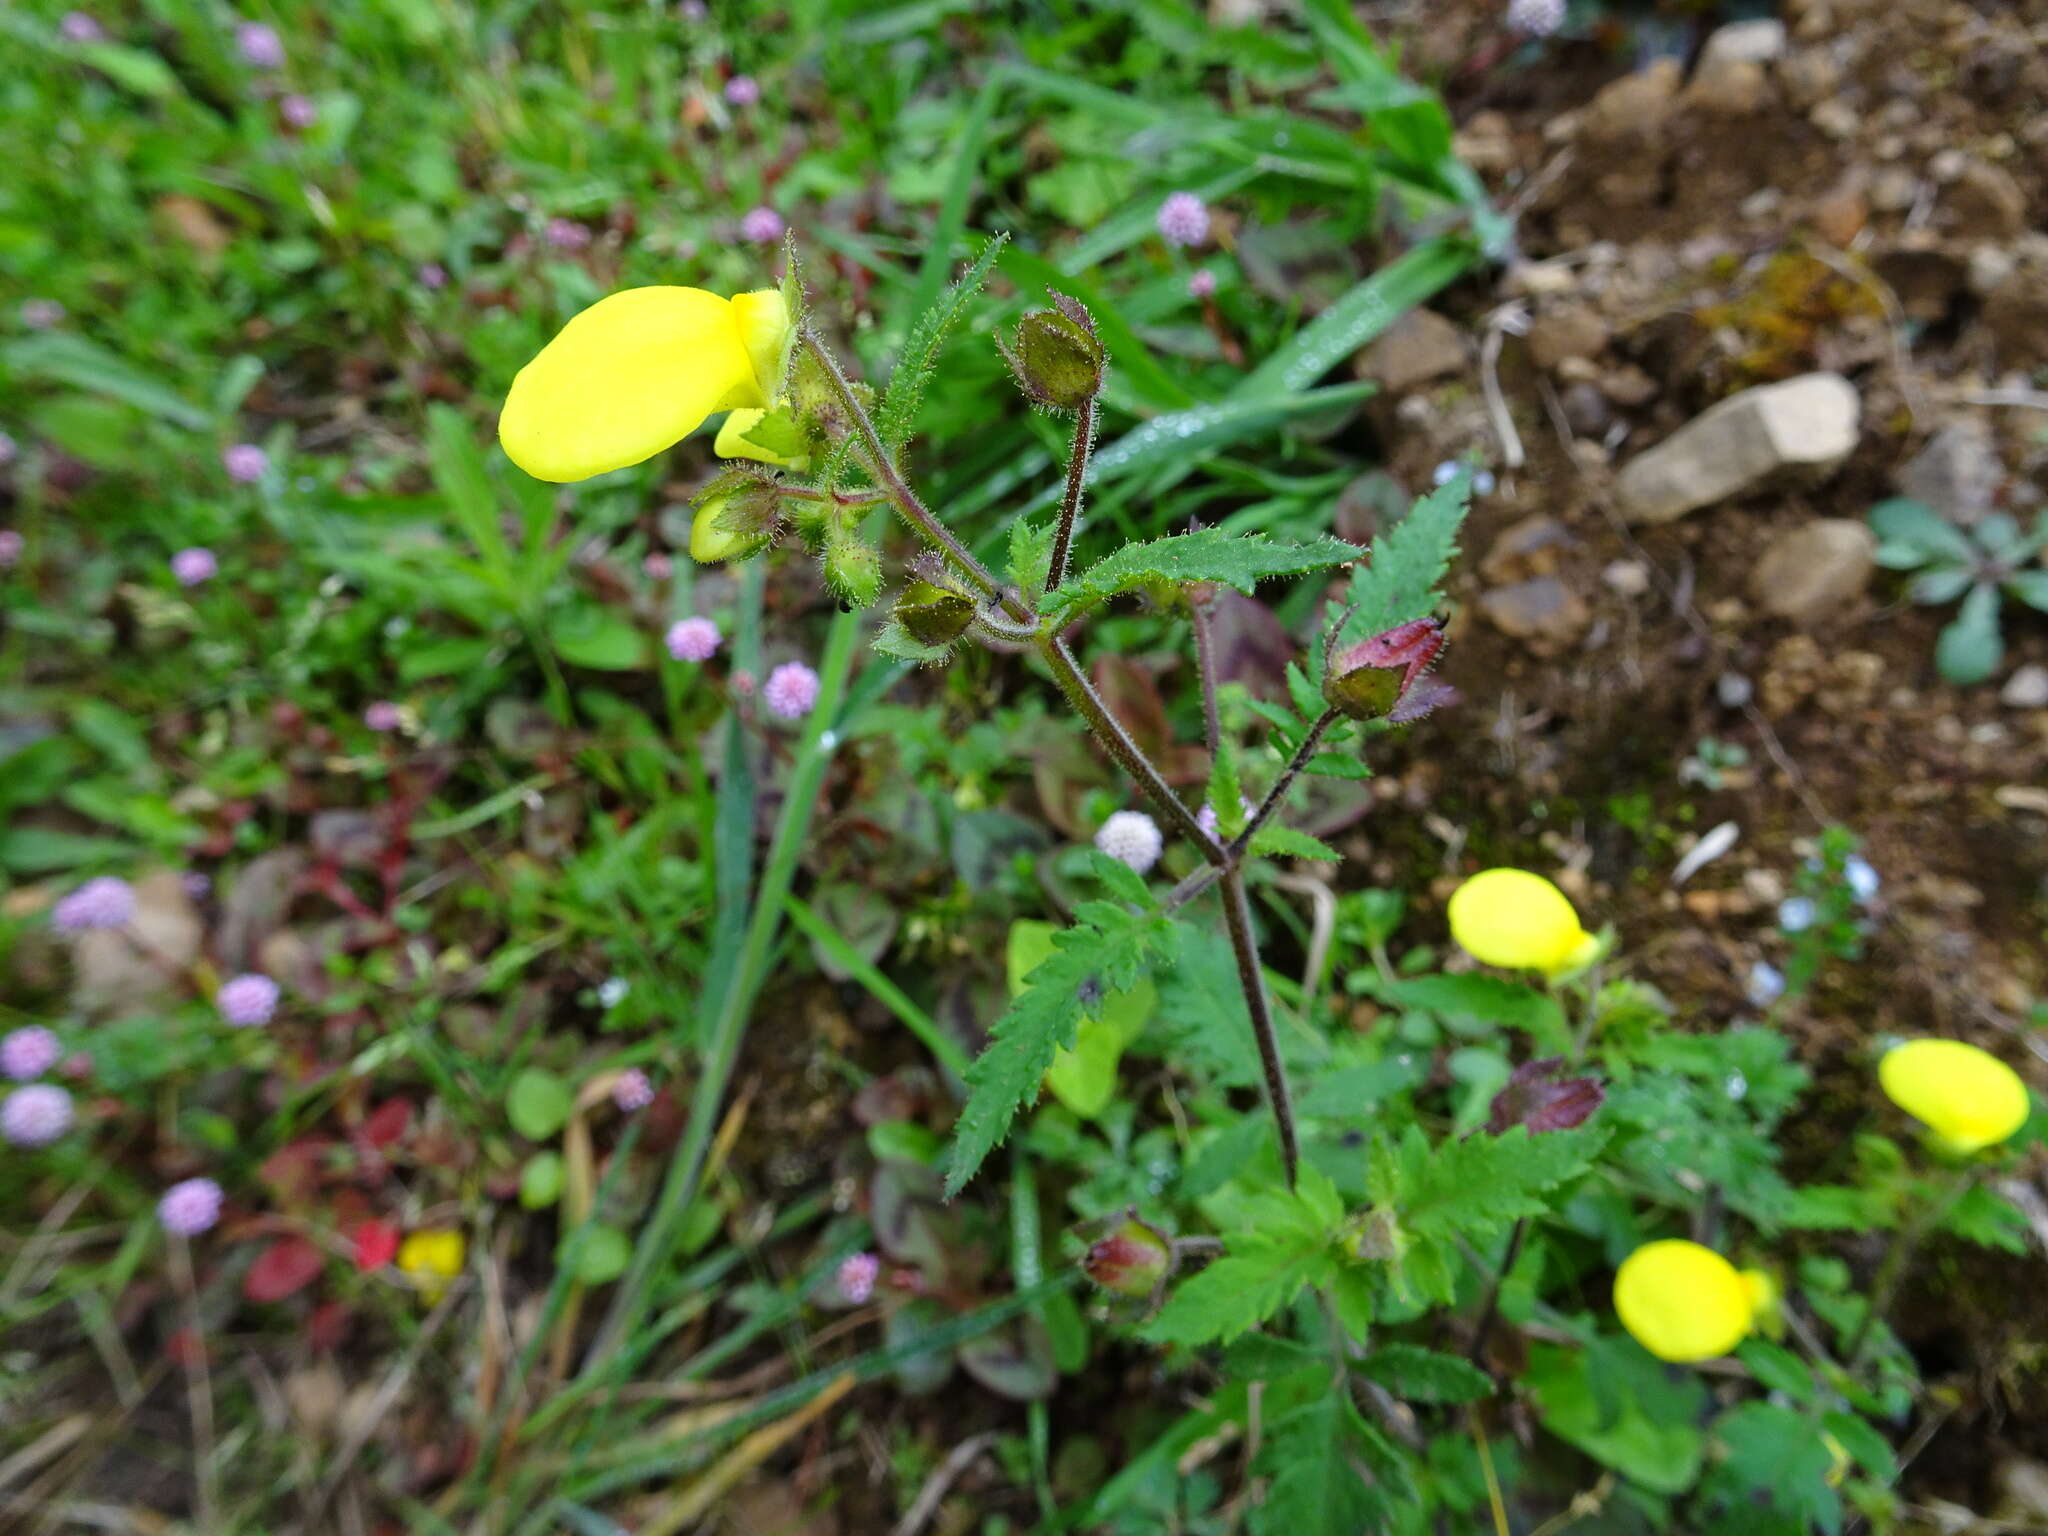 Image of Calceolaria mexicana Benth.